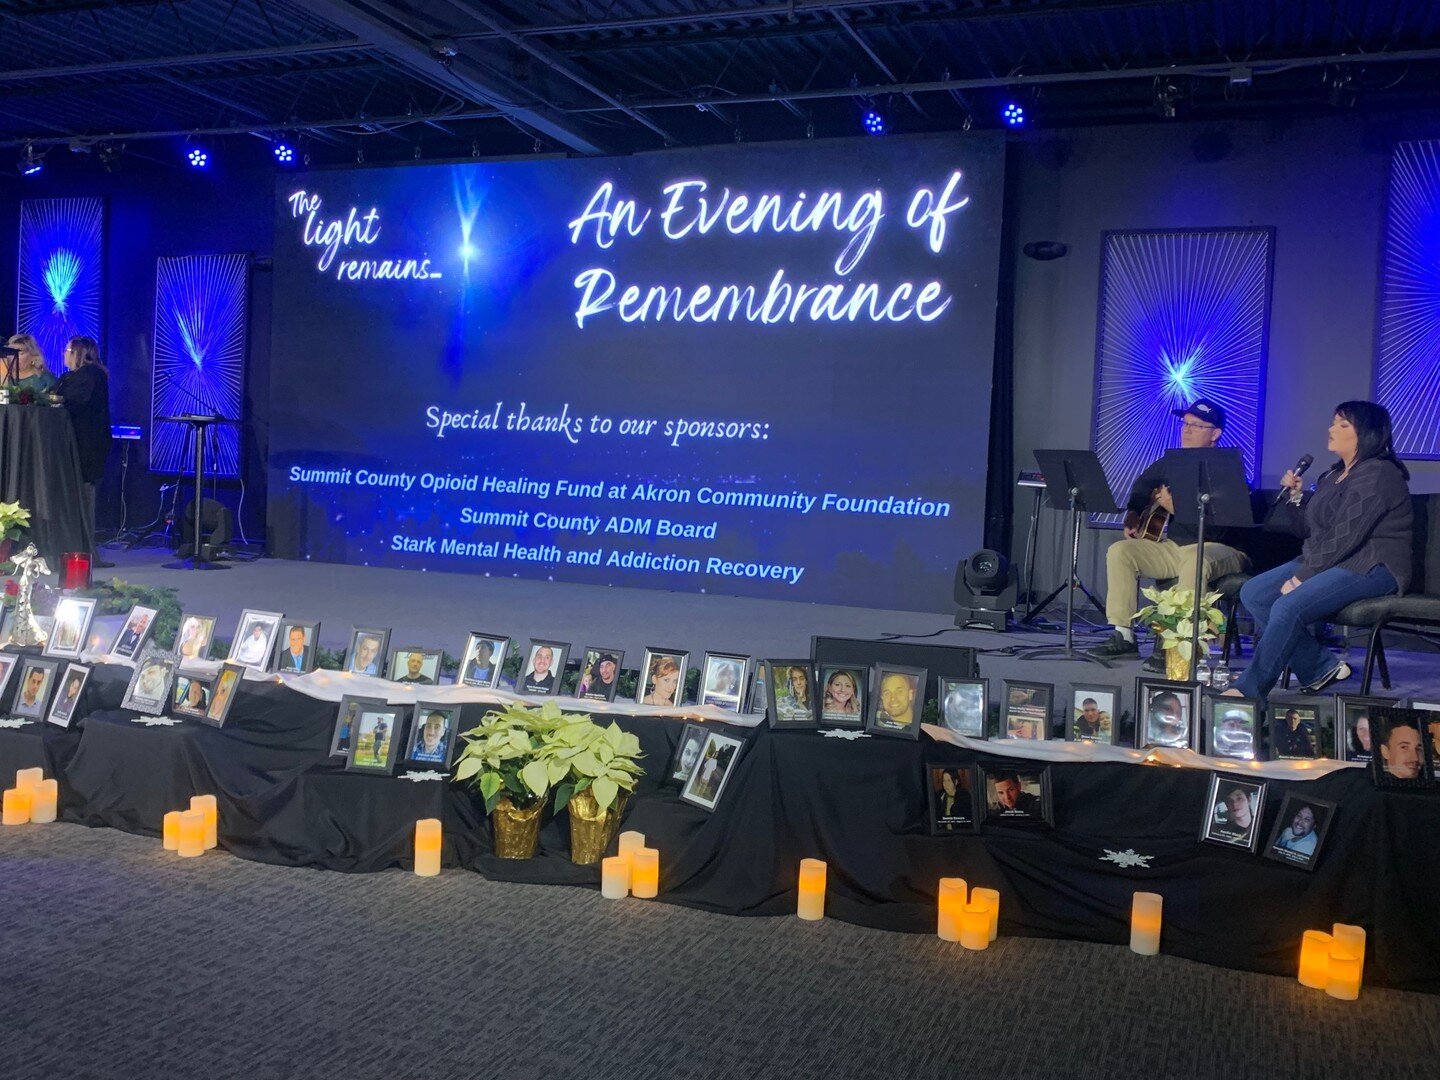 All set for &ldquo;An Evening of Remembrance&rdquo; at Compass North Church. This will be a special evening to remember those we lost too soon to addiction or overdose. 💔❤️ #WeAreHopeUnited #EveningOfRemembrance